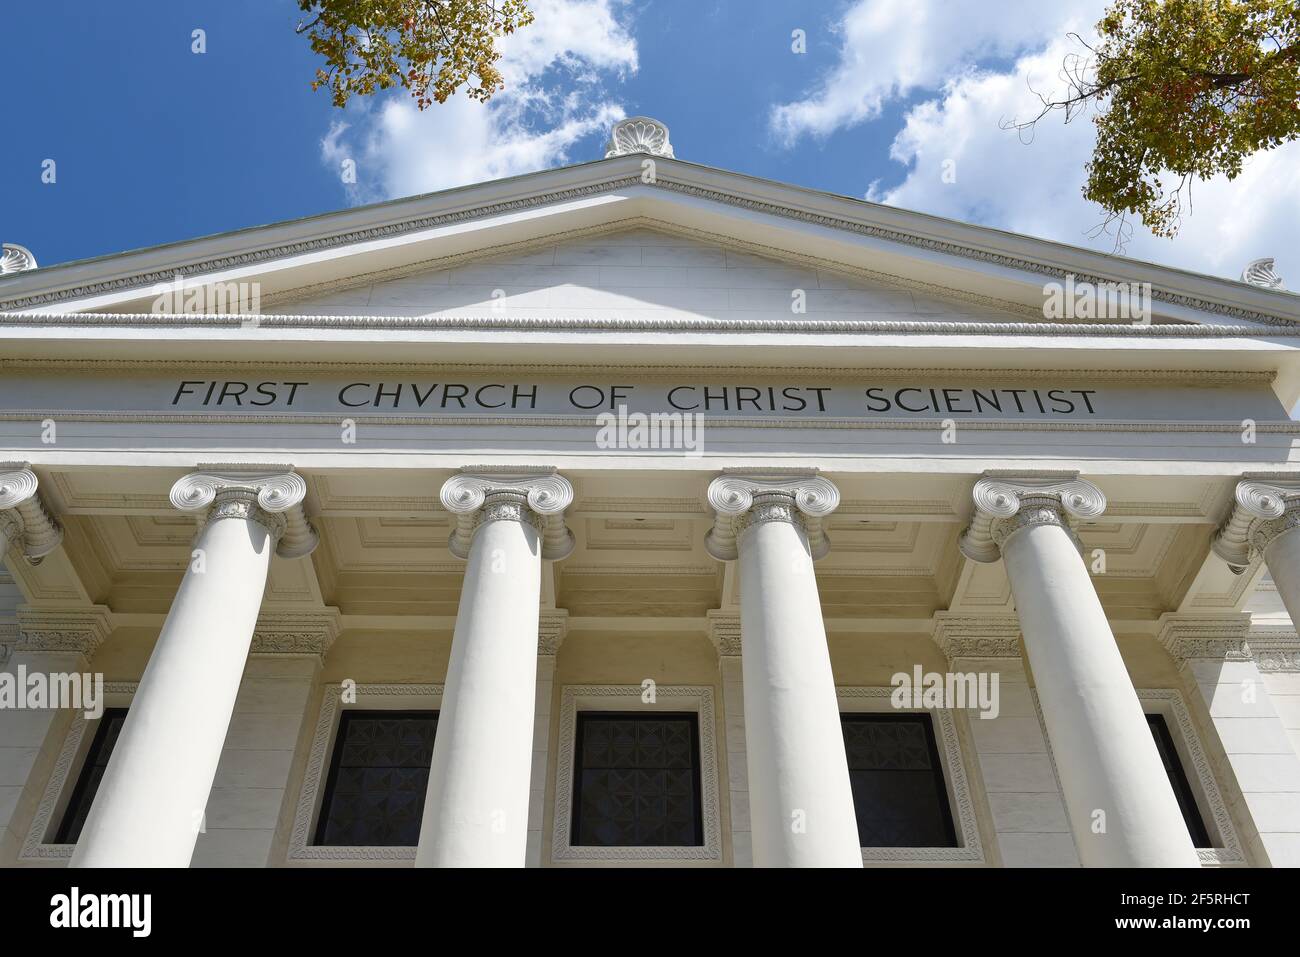 PASADENA, CALIFORNIA - 26 MAR 2021: The First Church of Christ Scientist. The Classic Revival style building was built in 1909. Stock Photo